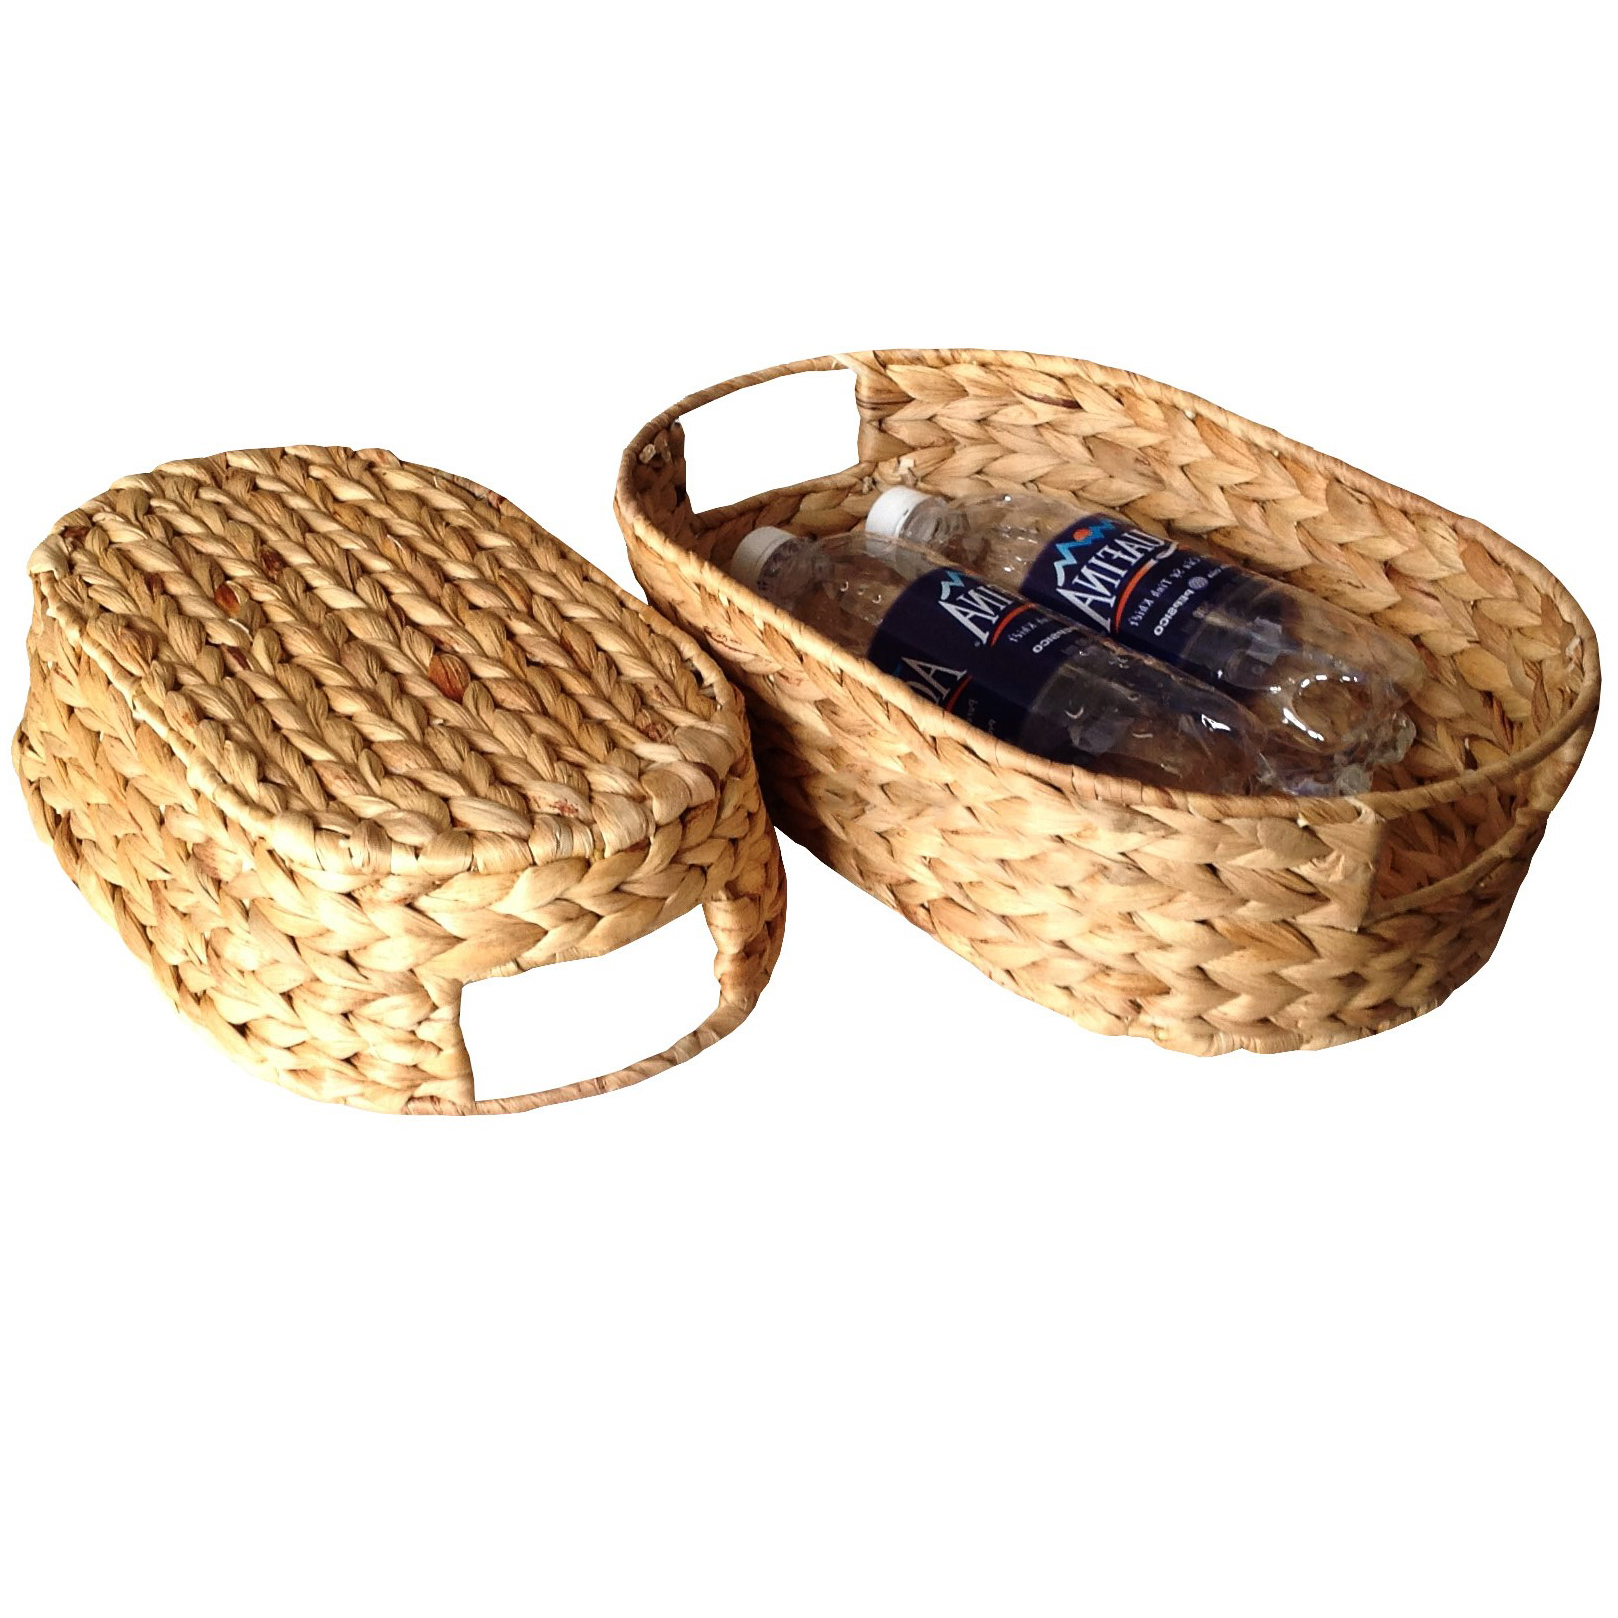 Good Price Rectangular Water Hyacinth Hamper Covered With Lids And 2 Small Baskets Handles On Both Sides Are Easy To Move 4